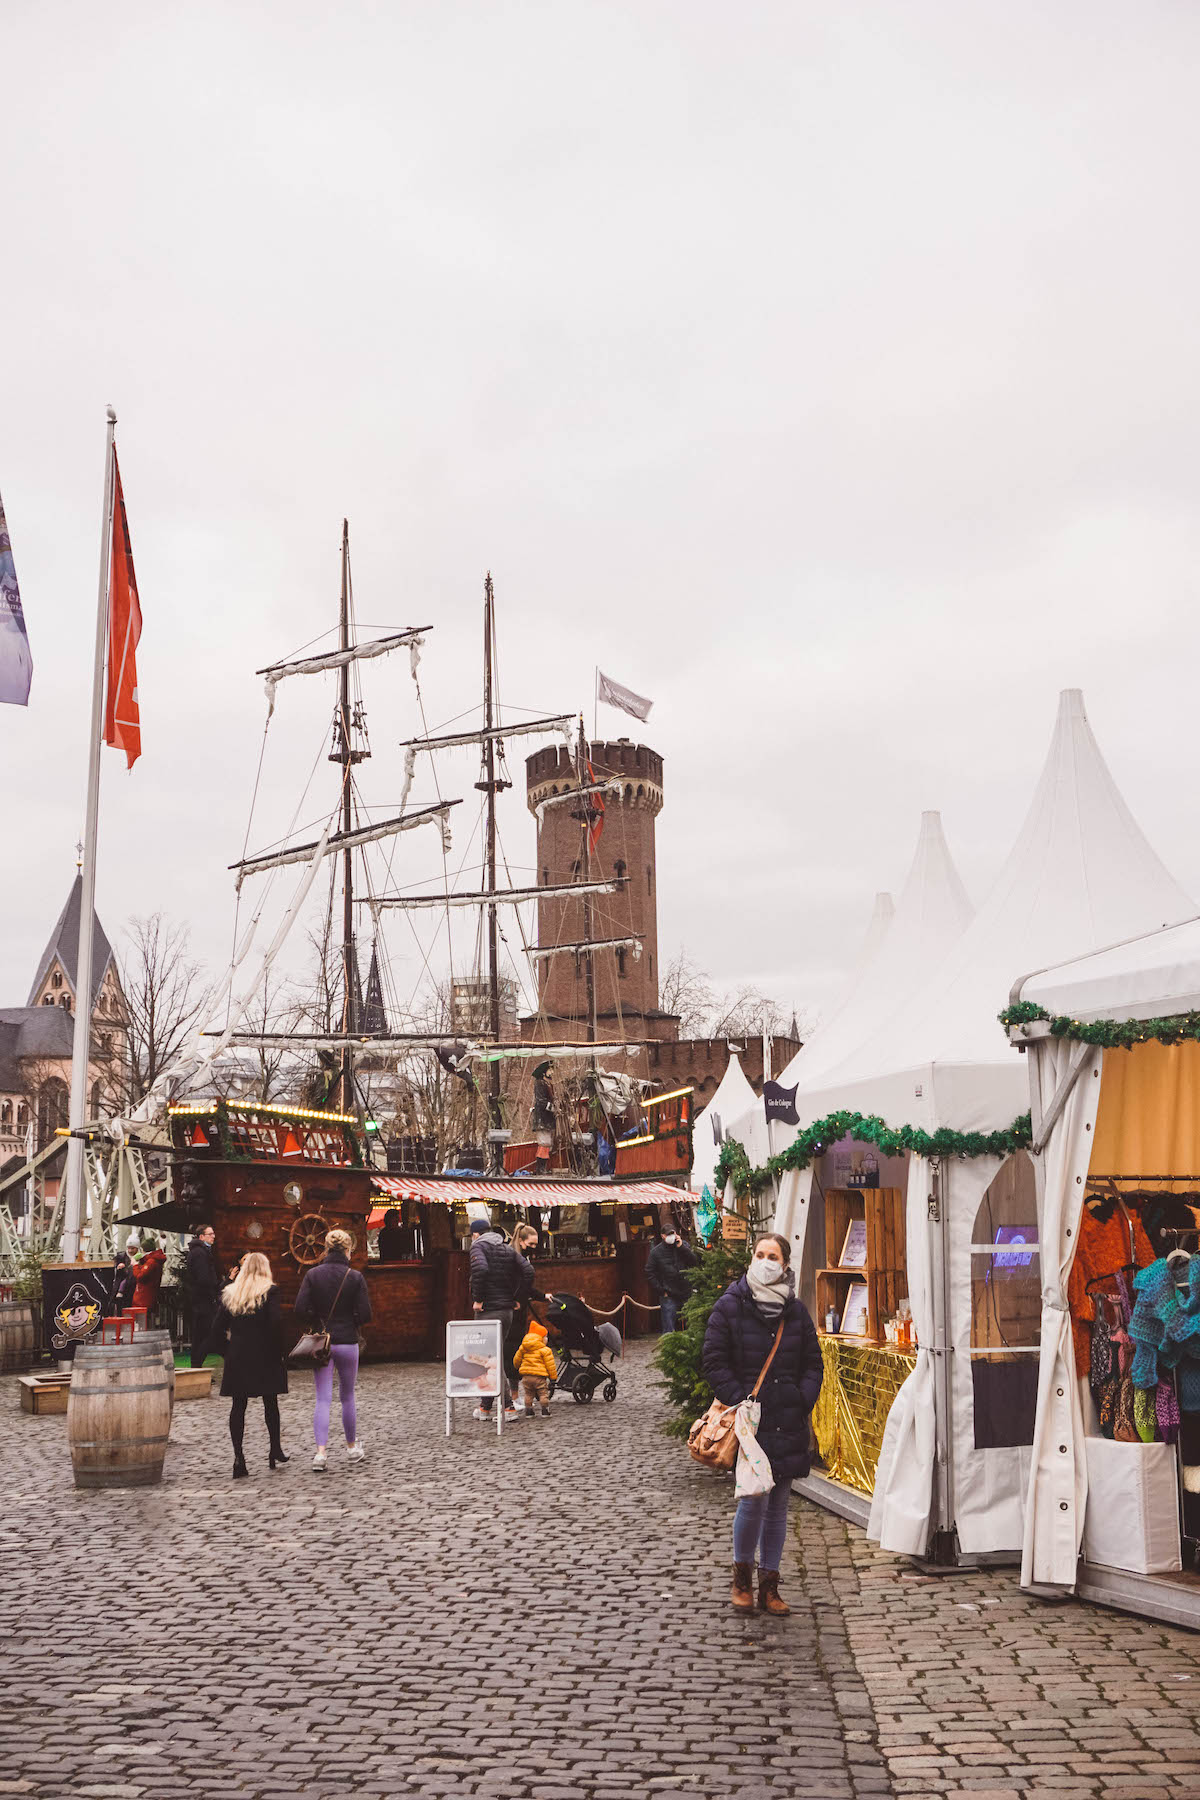 Christmas market at the Cologne harbor